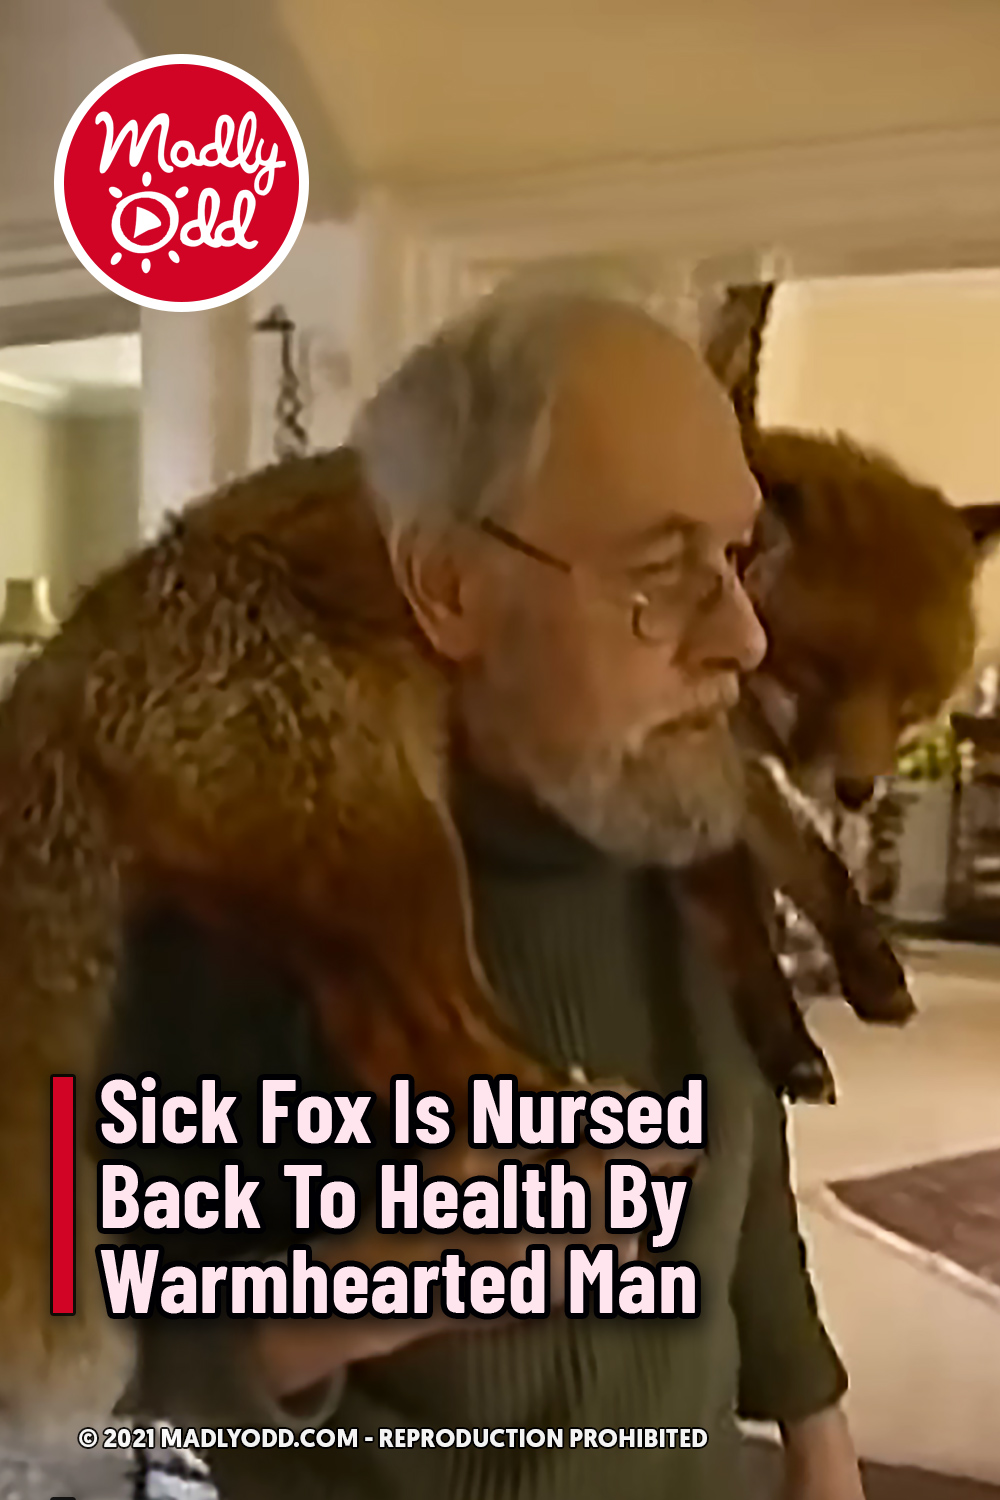 Sick Fox Is Nursed Back To Health By Warmhearted Man